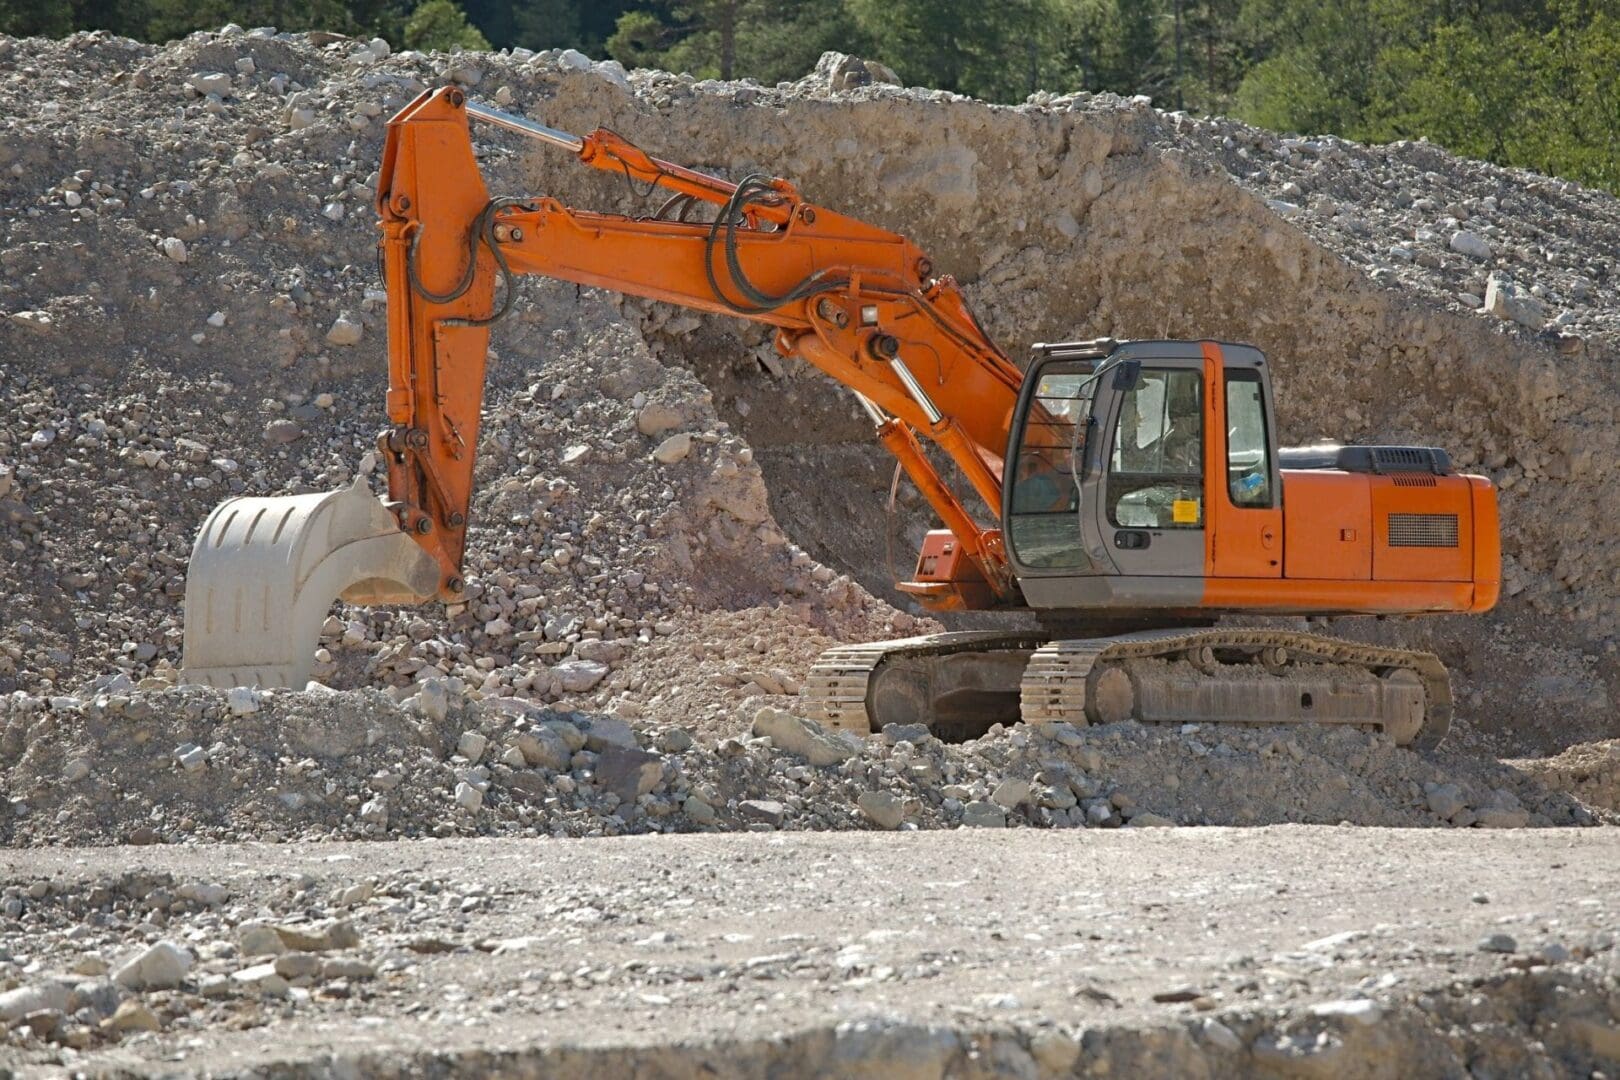 A large orange and white excavator is in the dirt.